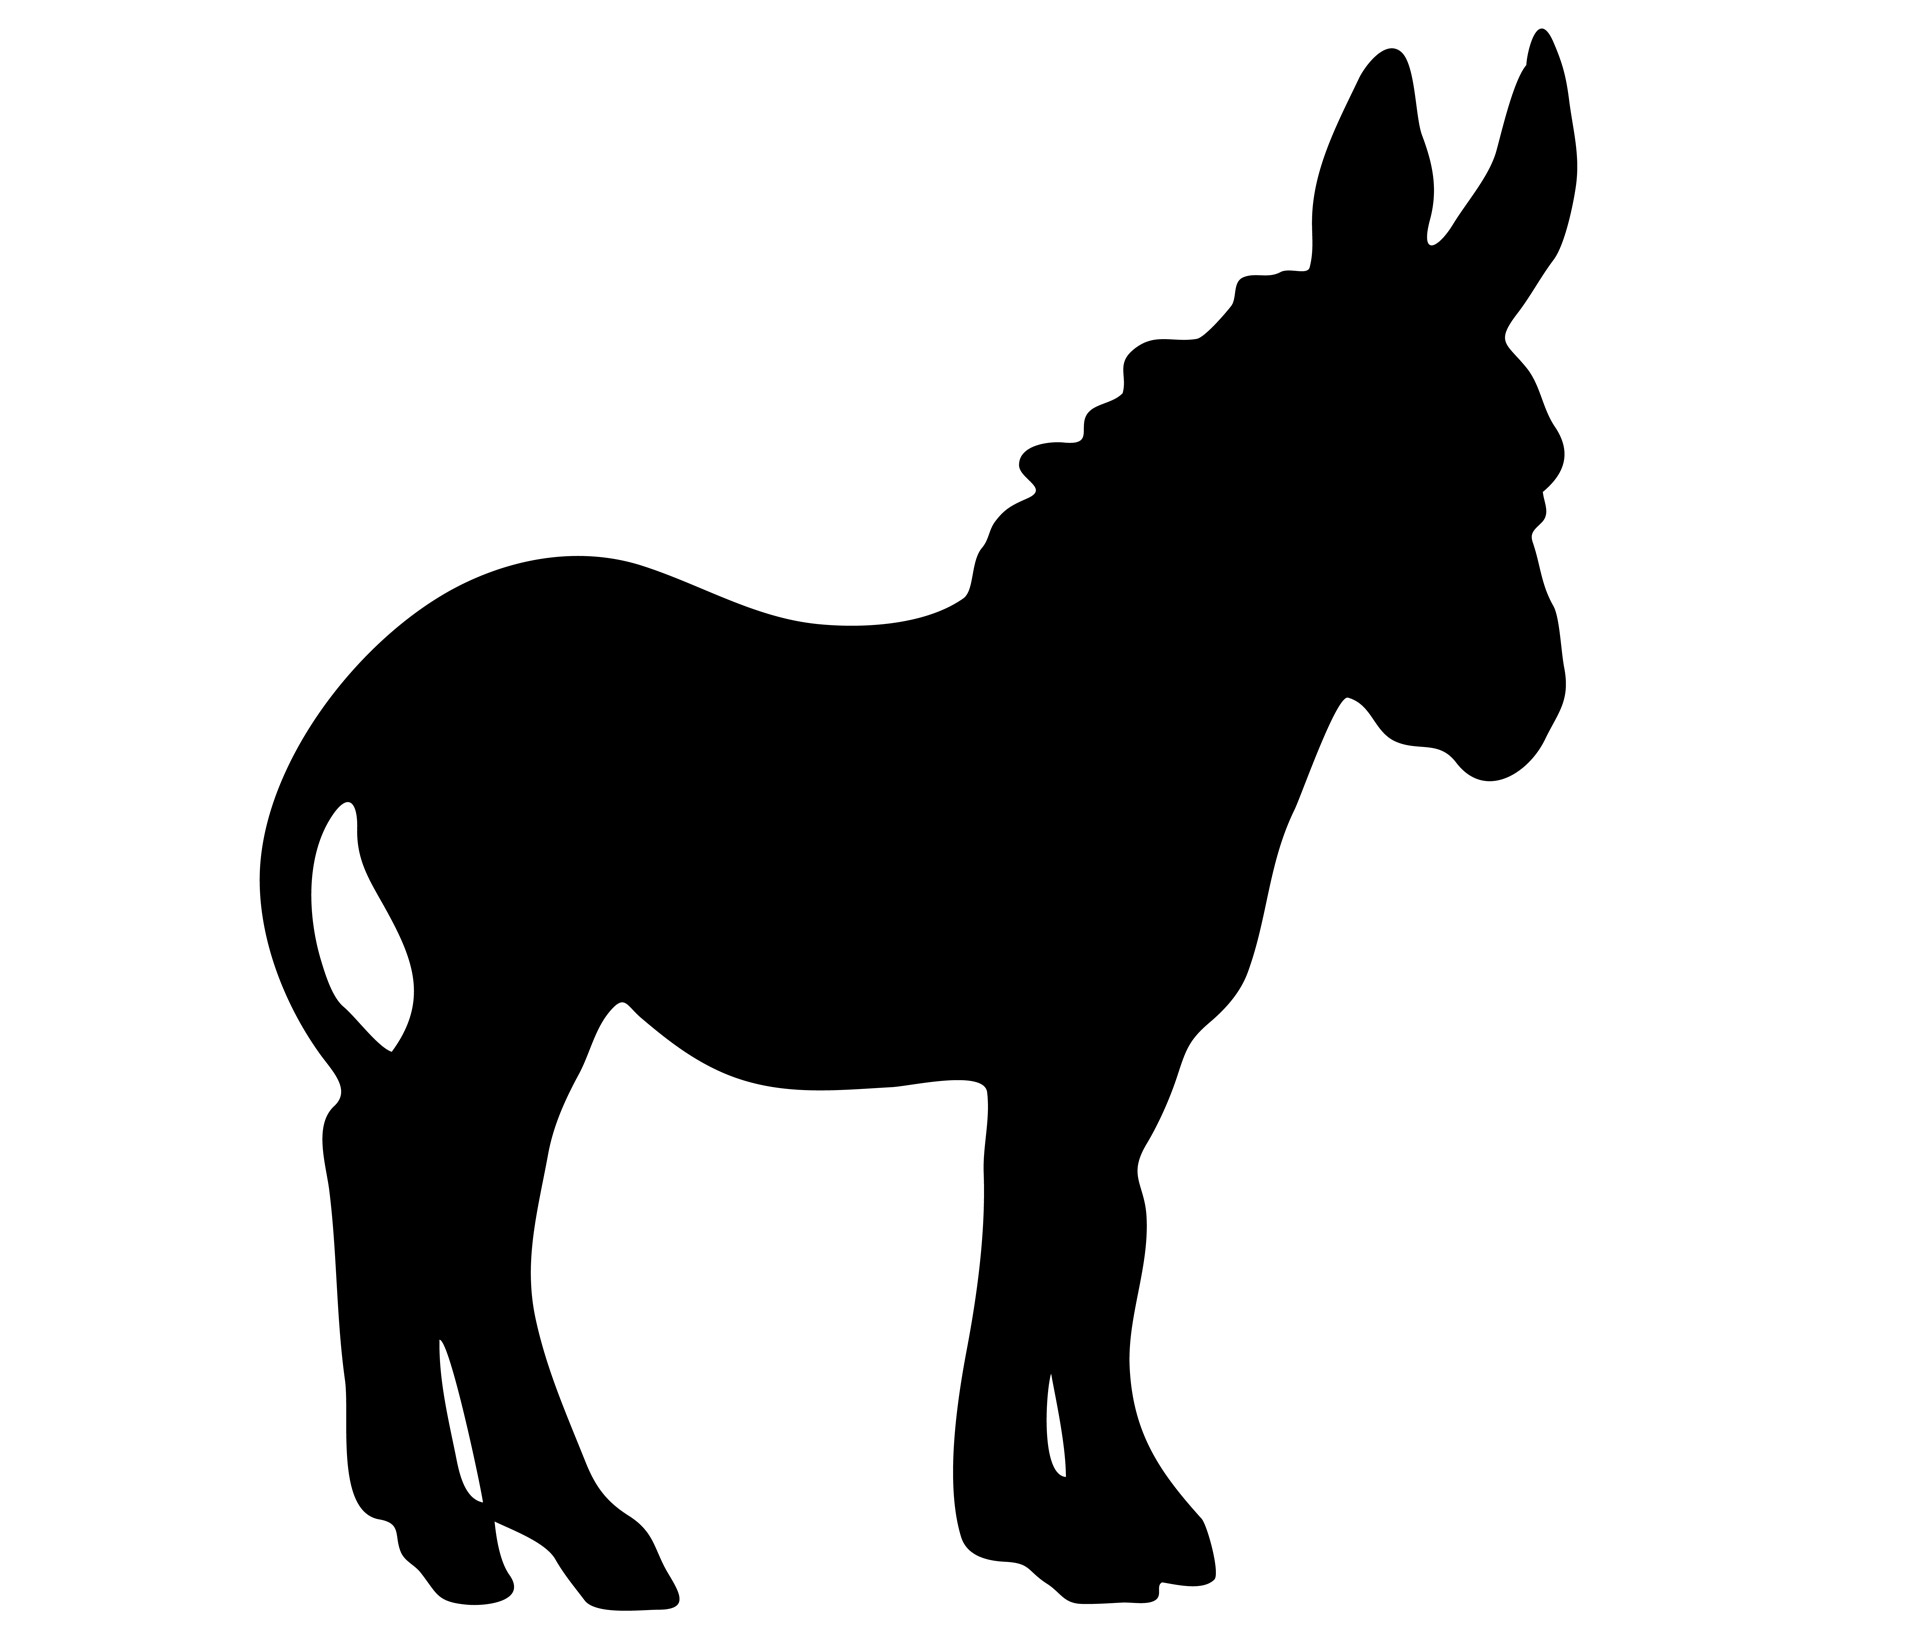 free clipart silhouette animals - photo #35